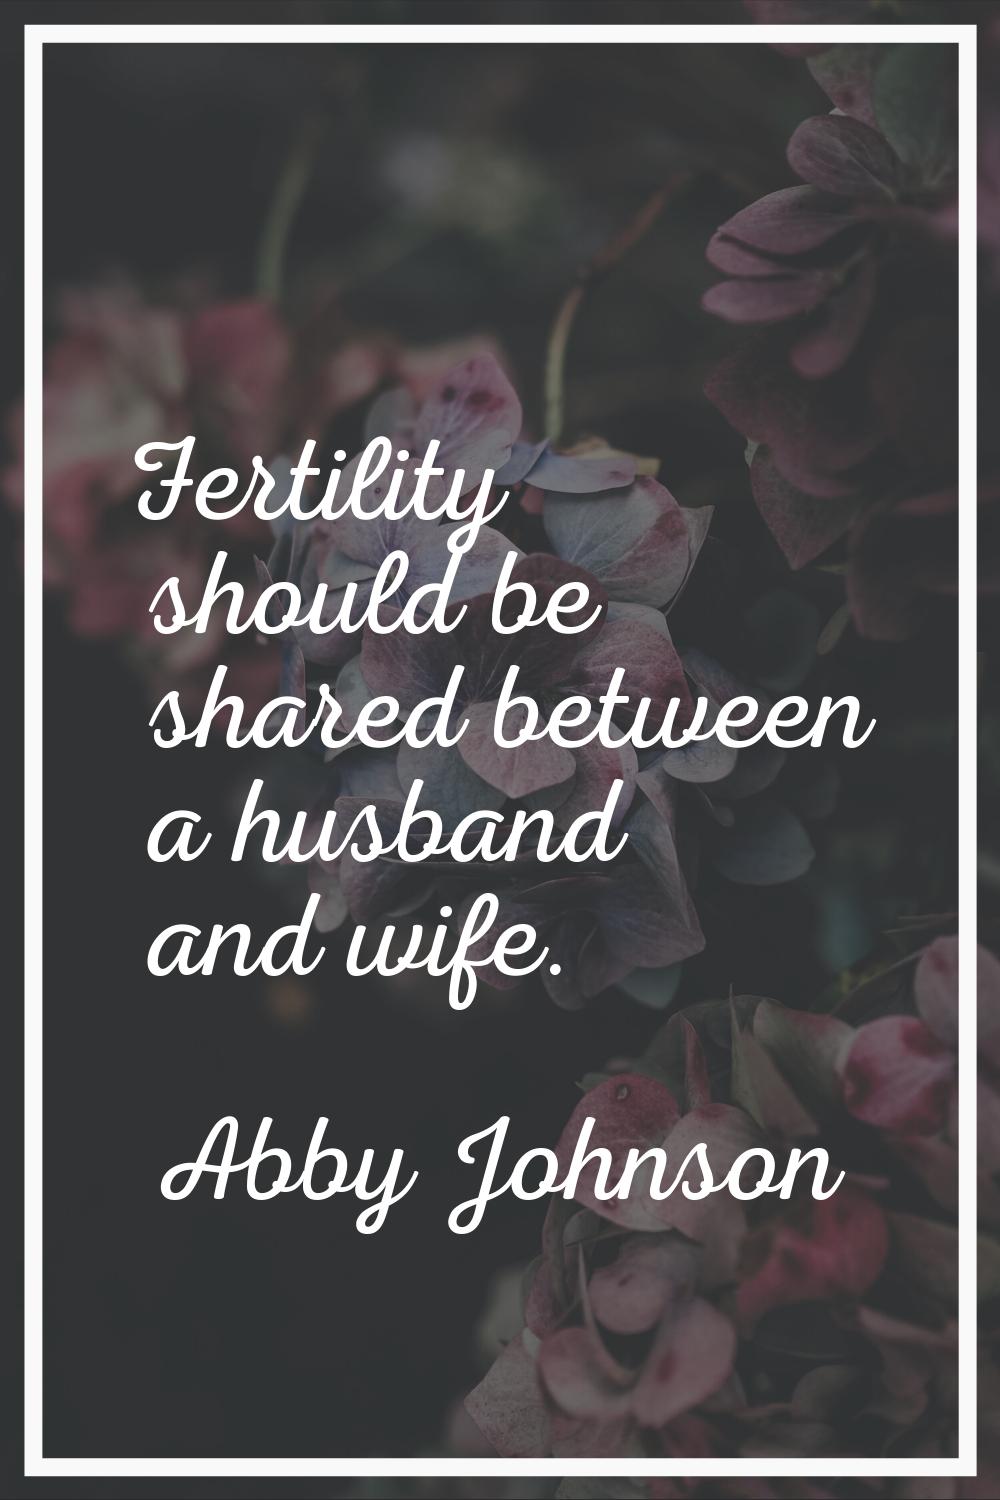 Fertility should be shared between a husband and wife.